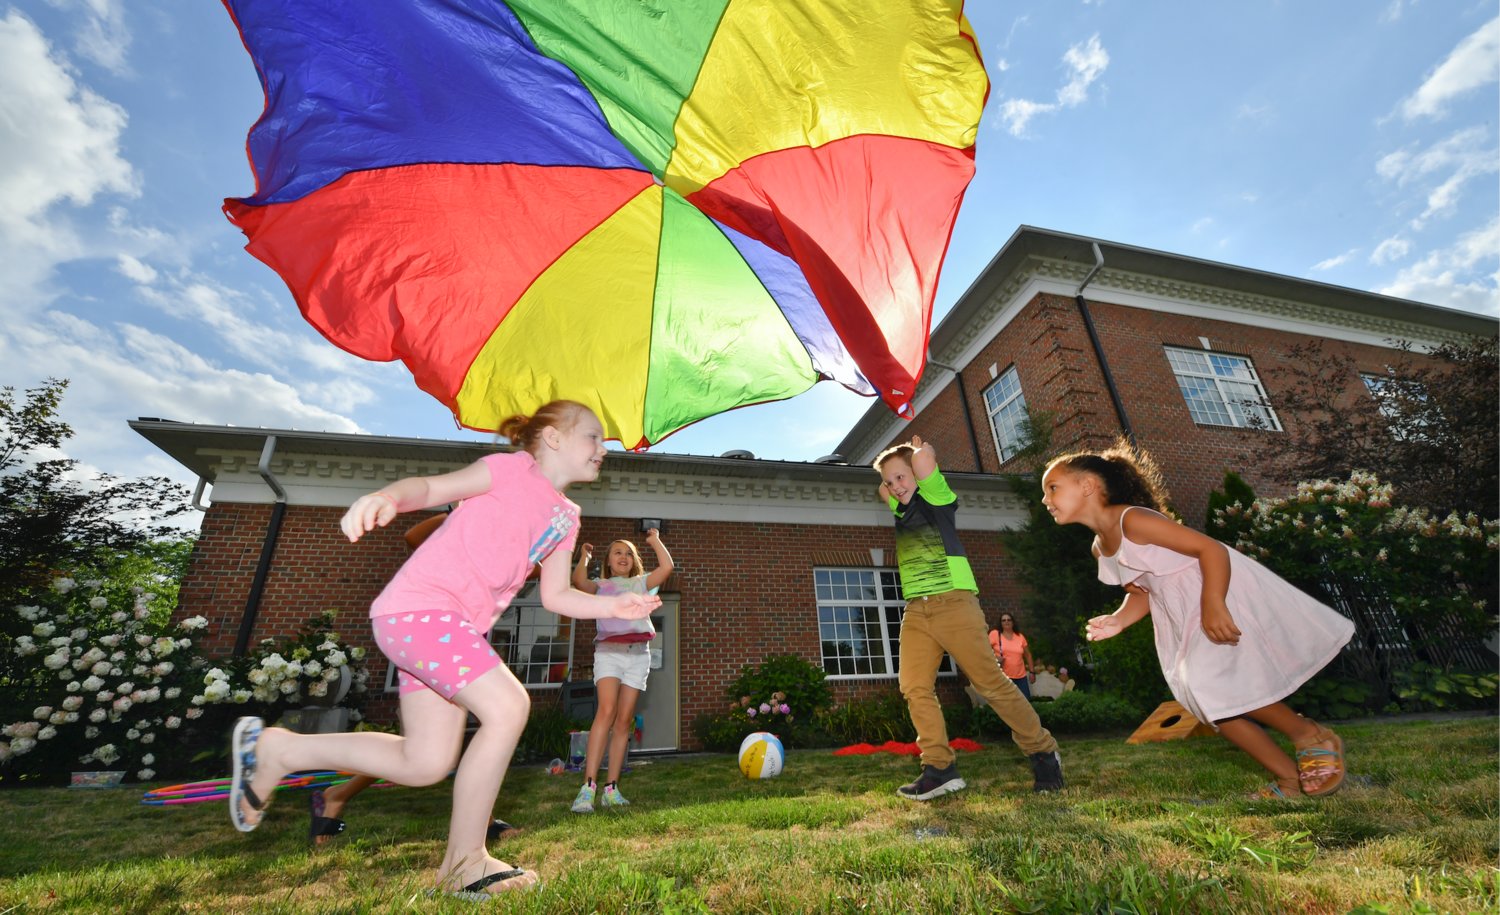 Several kids run under a small parachute after throwing it up in the air while playing a game at the McBride Memorial Library Garden Party at the end of their Summer Reading Party Tuesday, Aug. 3, 2021 in Berwick, PA.